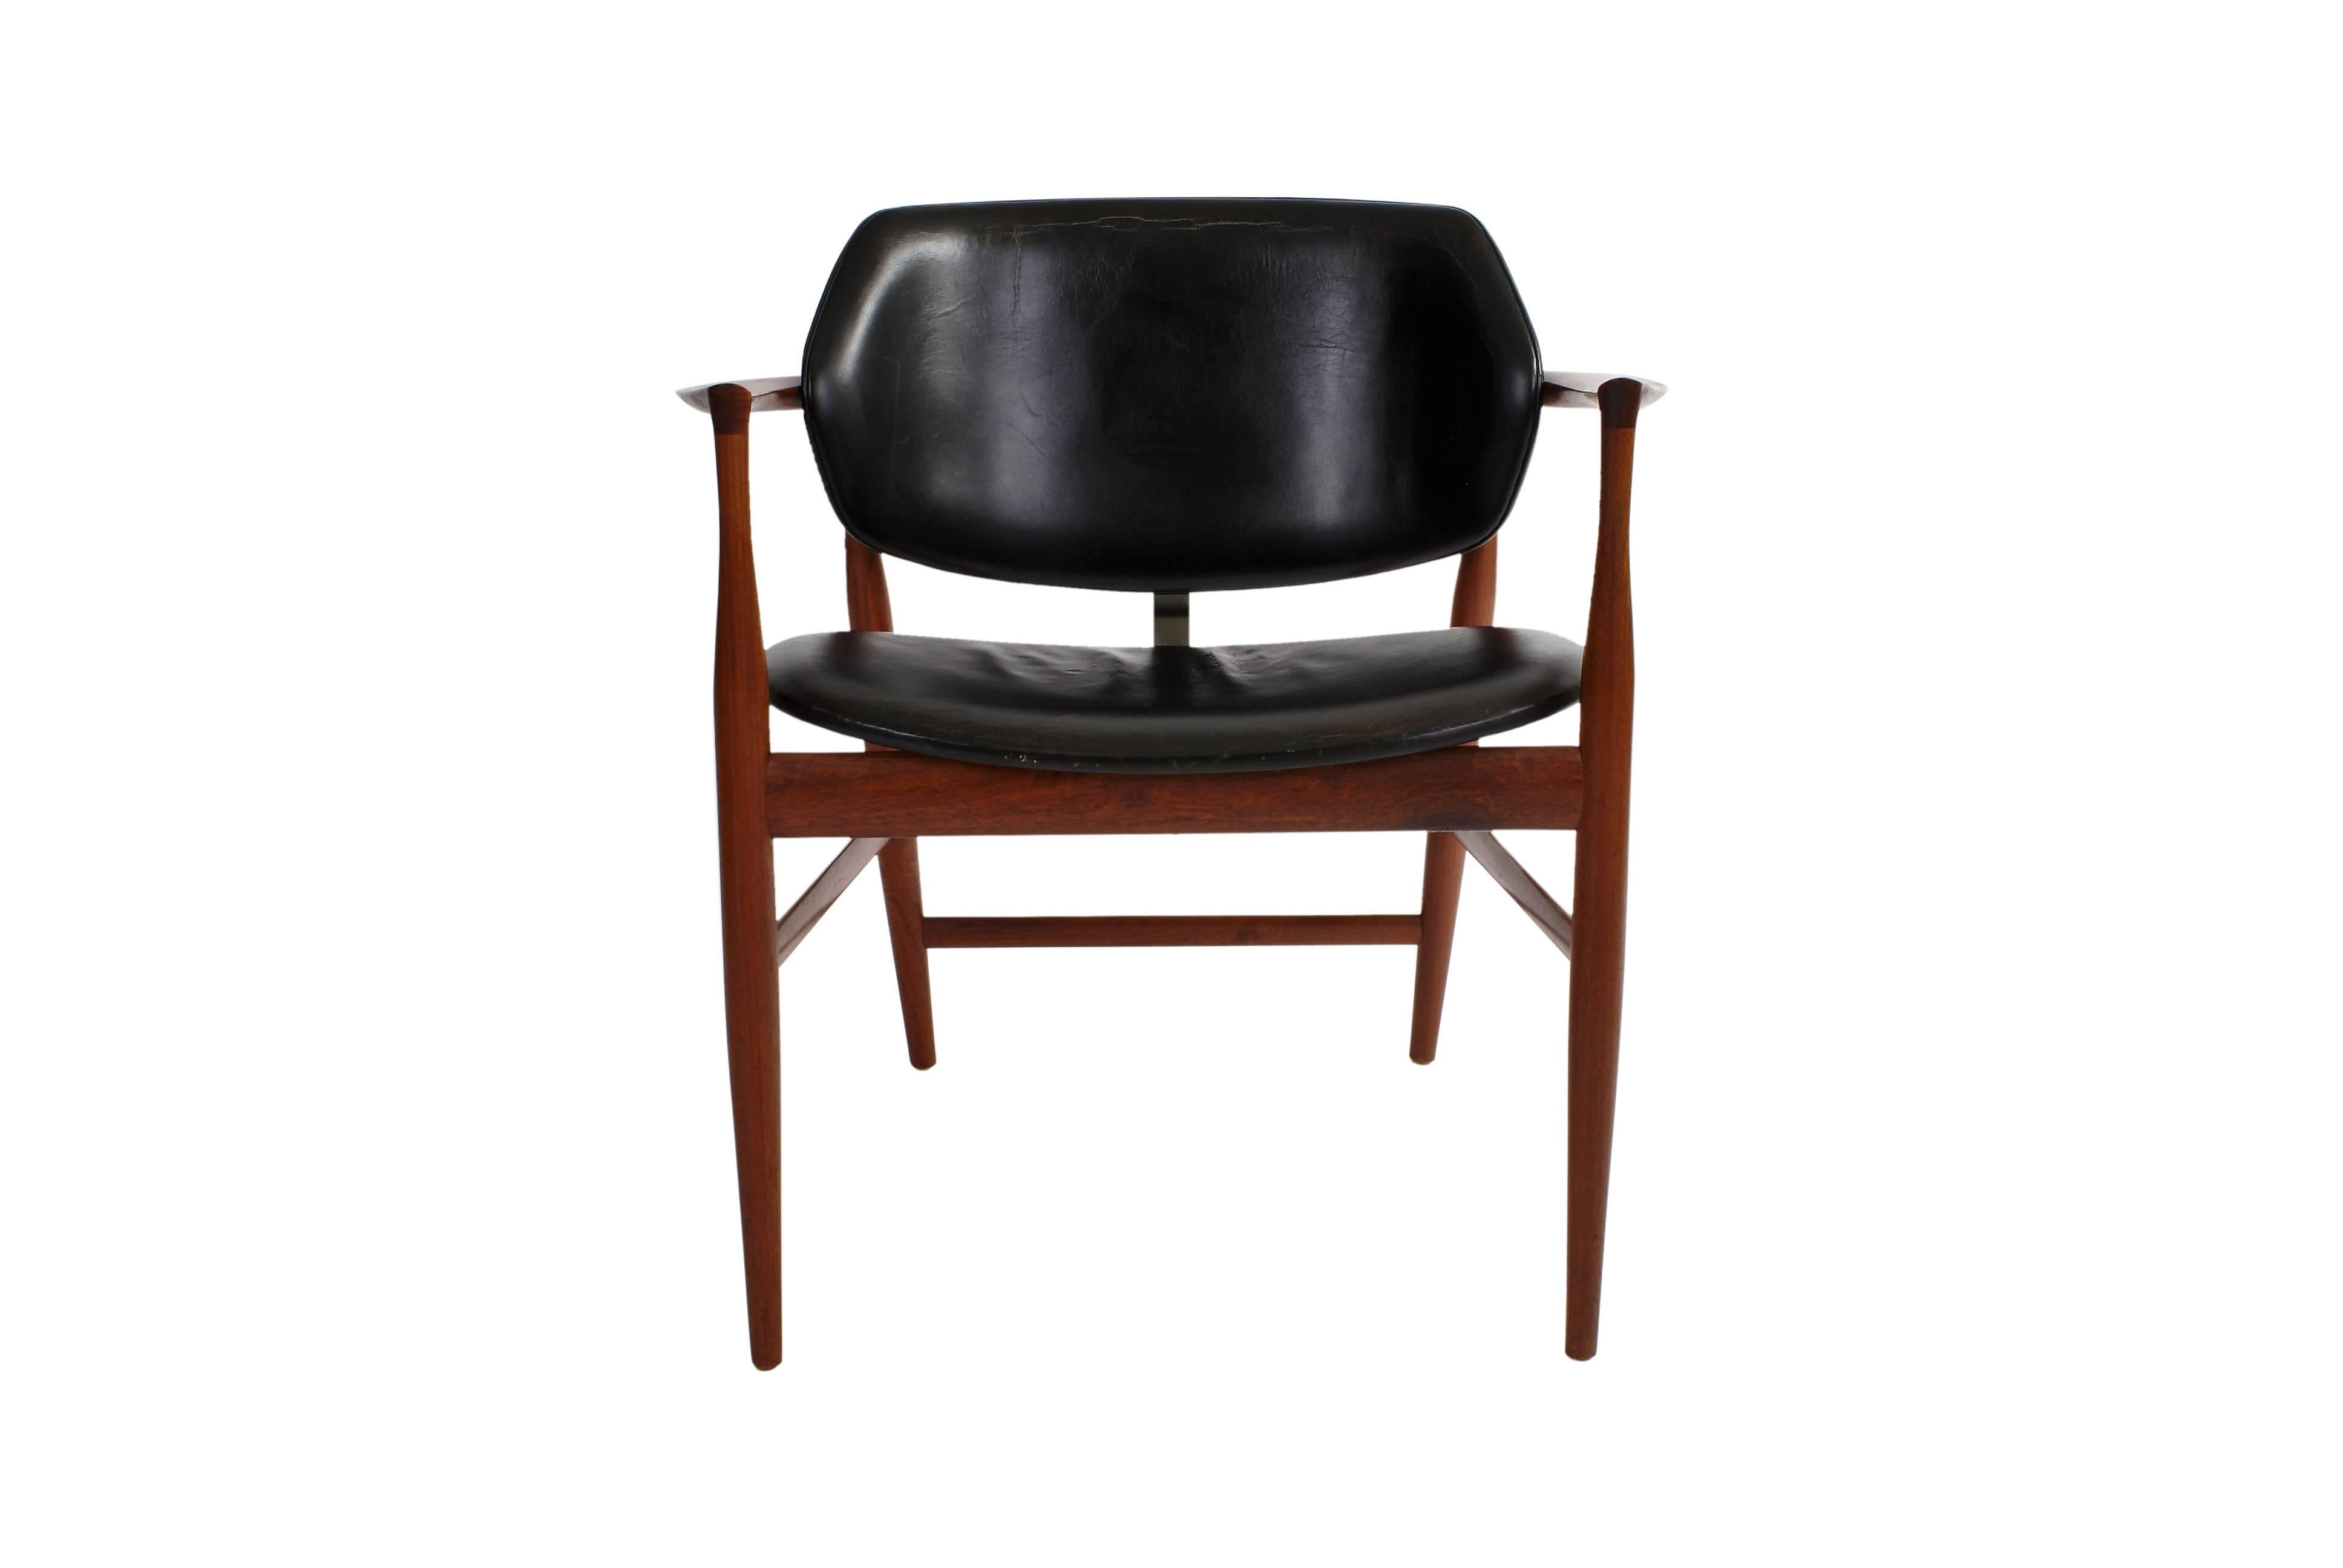 Ib Kofod-Larsen rare 'Elizabeth' armchair in Cuban mahogany. Seat and back upholstered with patinated original black leather. Designed 1958. Made by Christensen & Larsen cabinetmakers.

Model presented at The Copenhagen Cabinetmakers' Guild